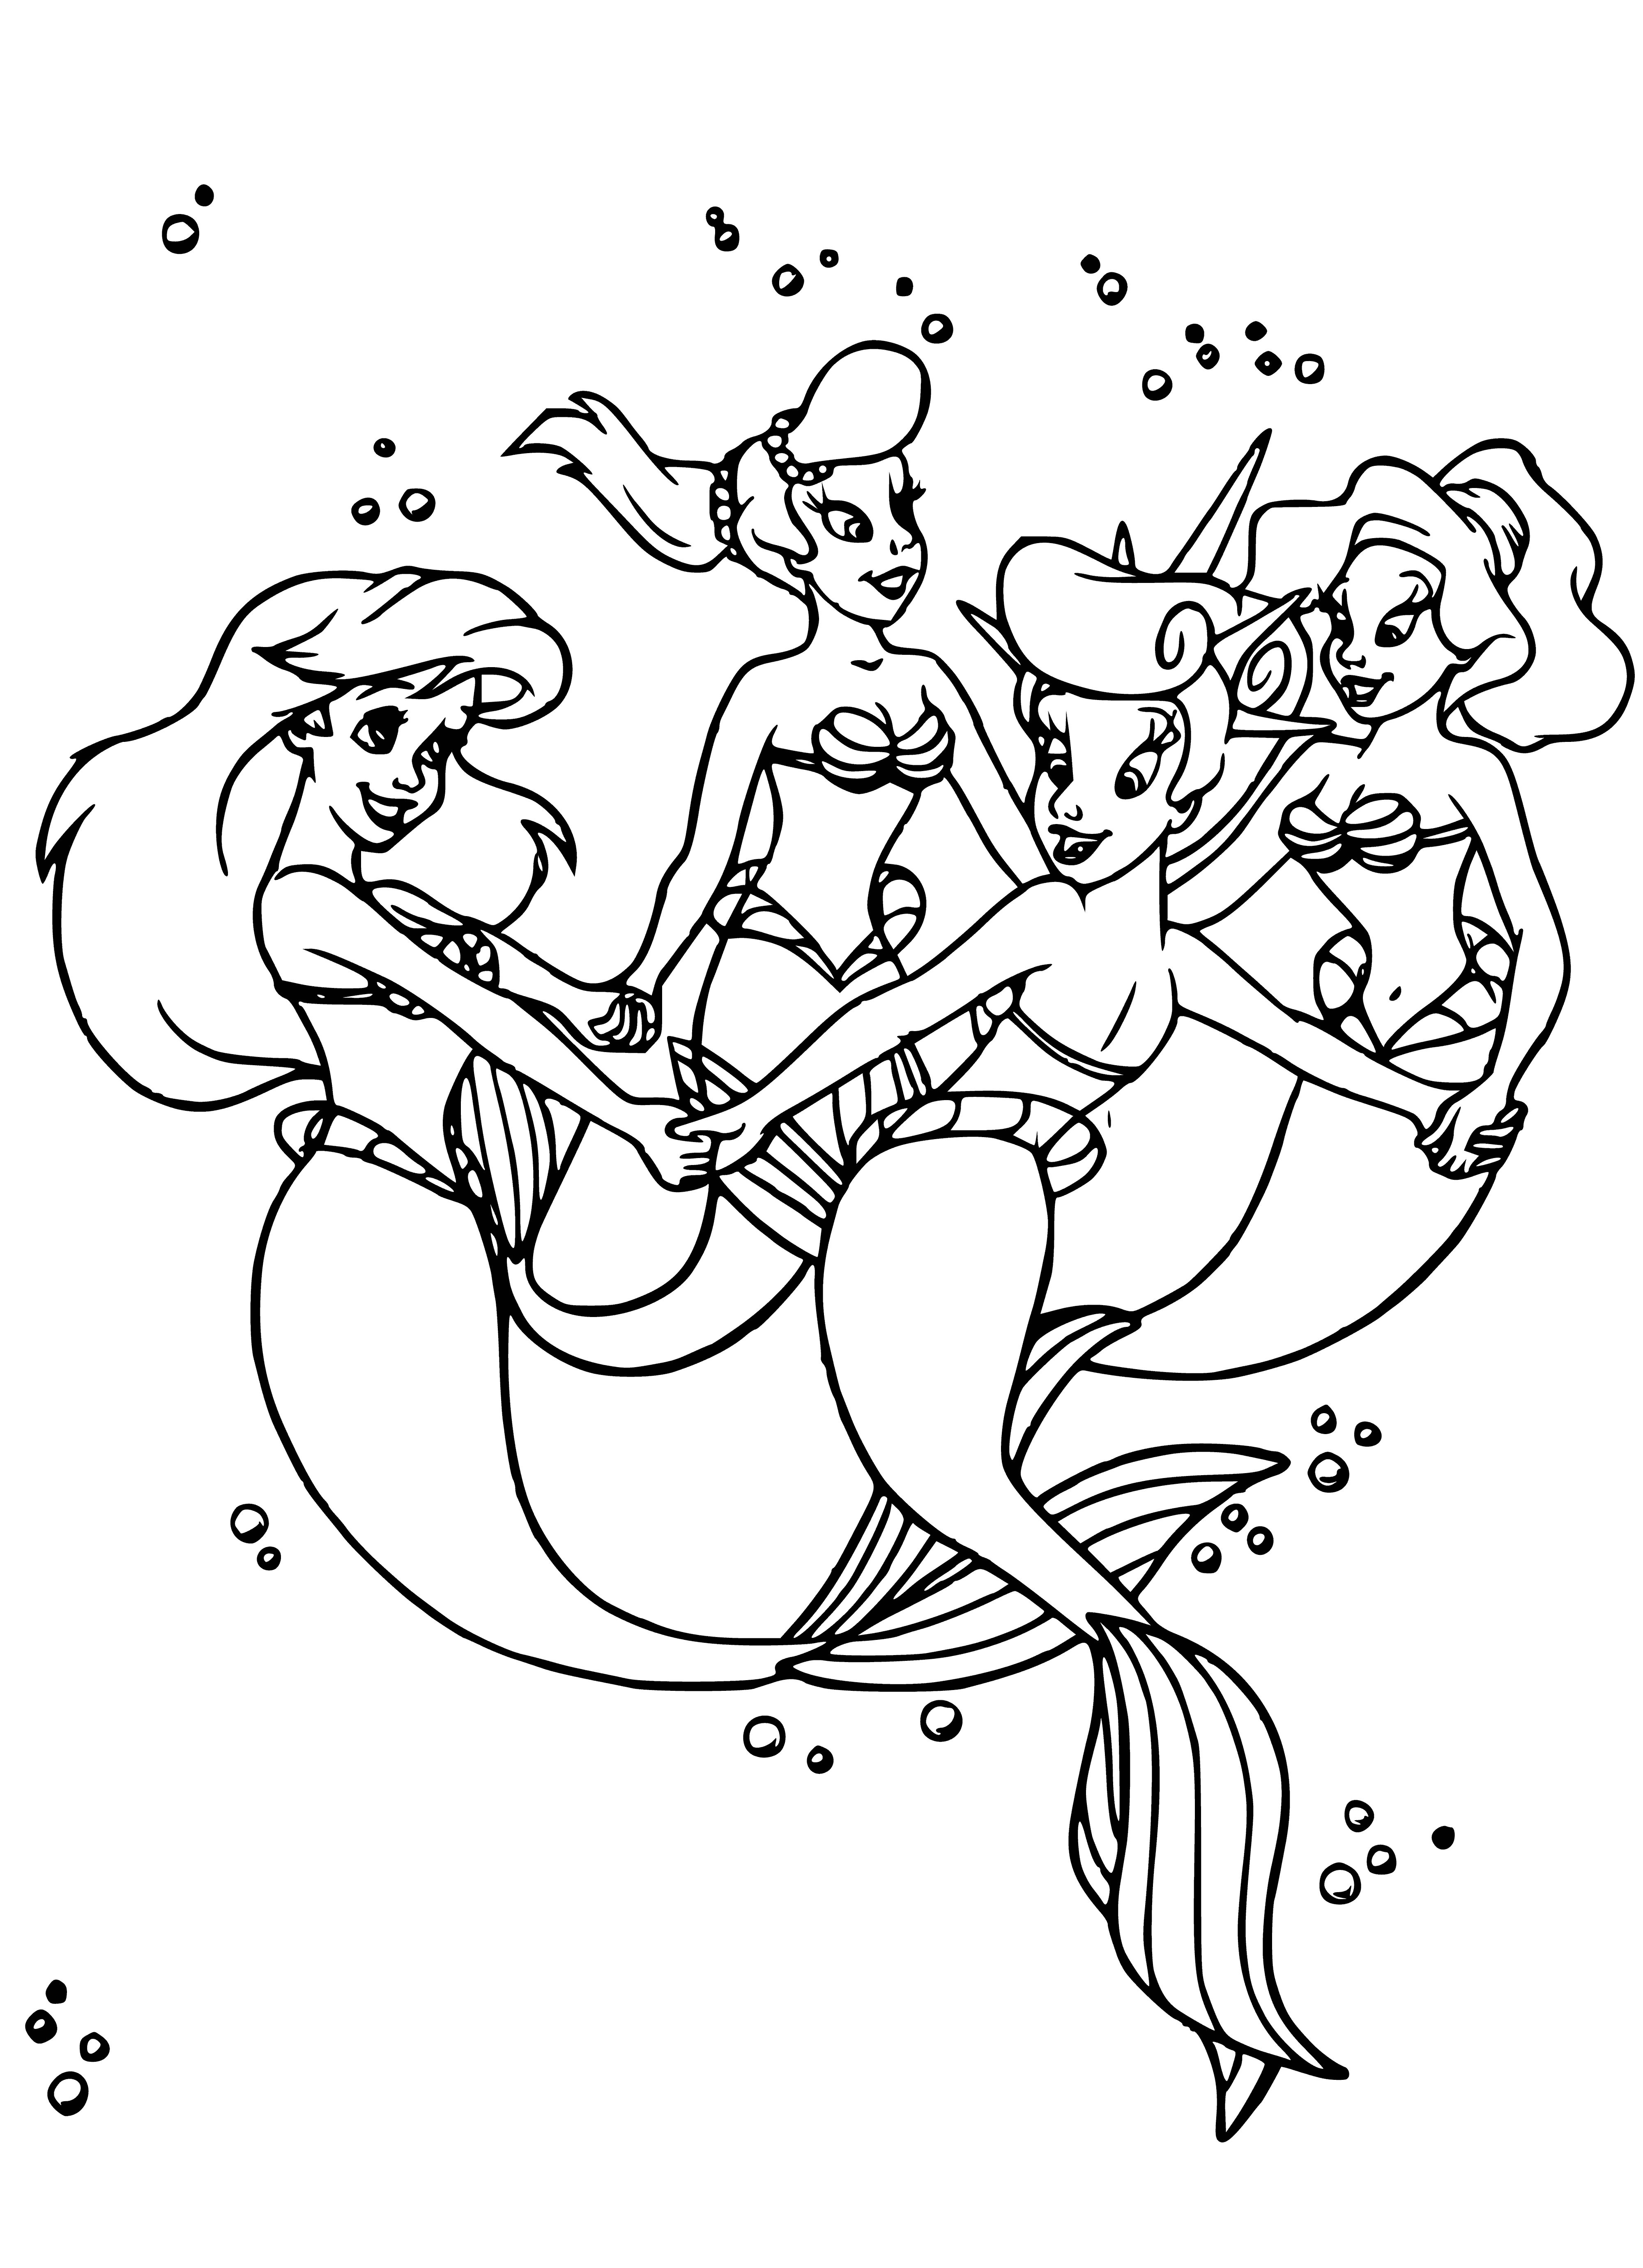 Ariel's girlfriends coloring page